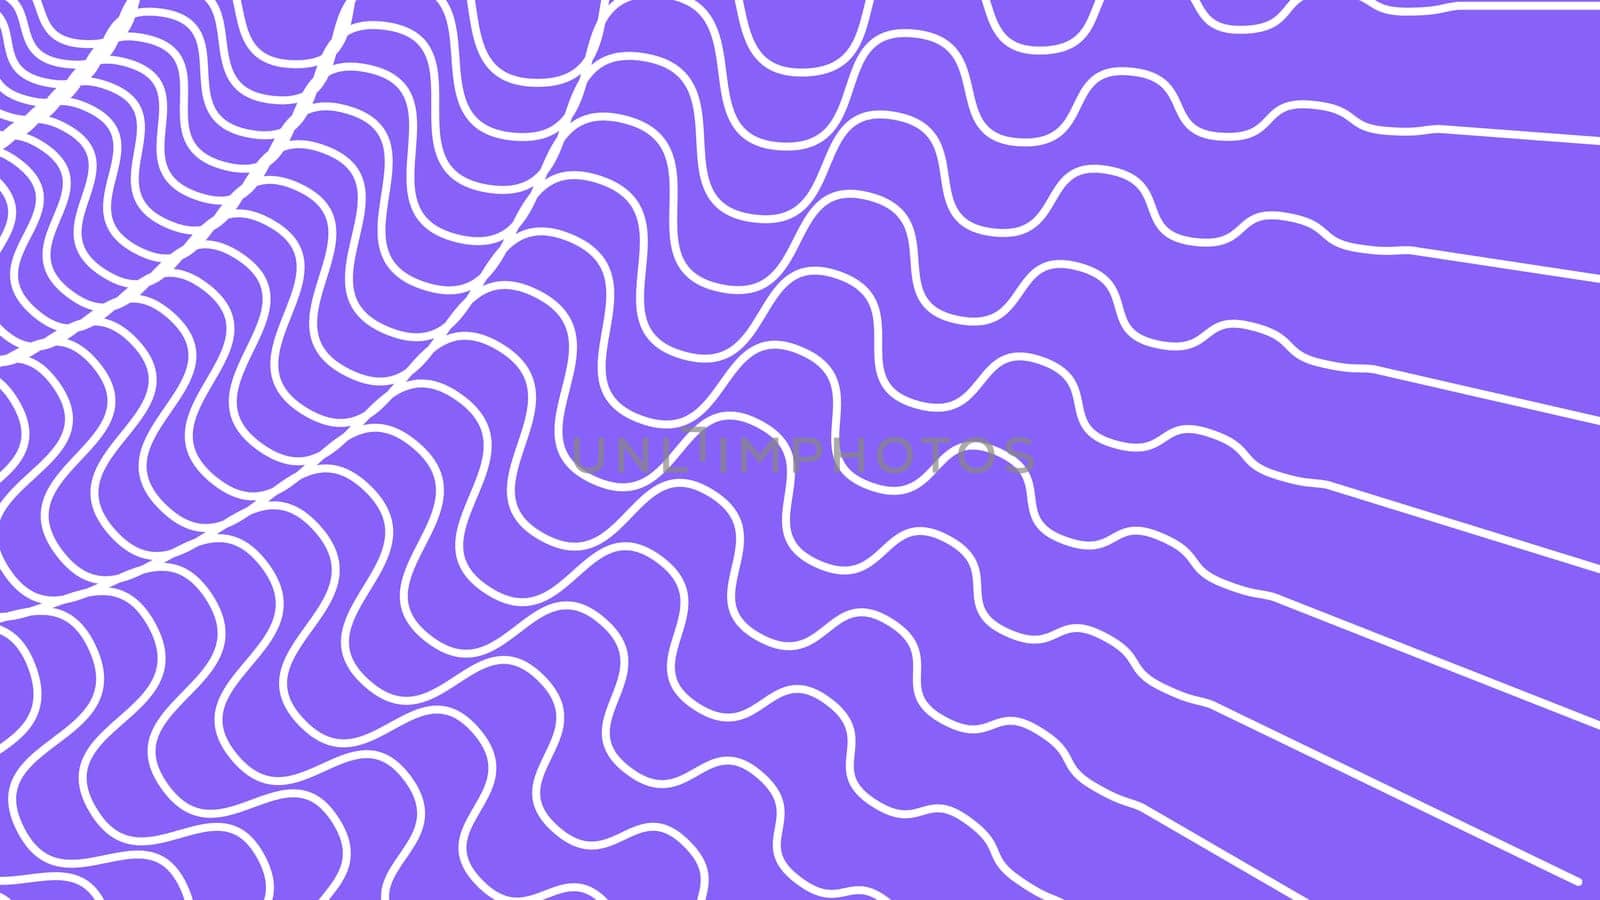 Minimal wavy abstract background. White curved lines on purple background. High quality photo